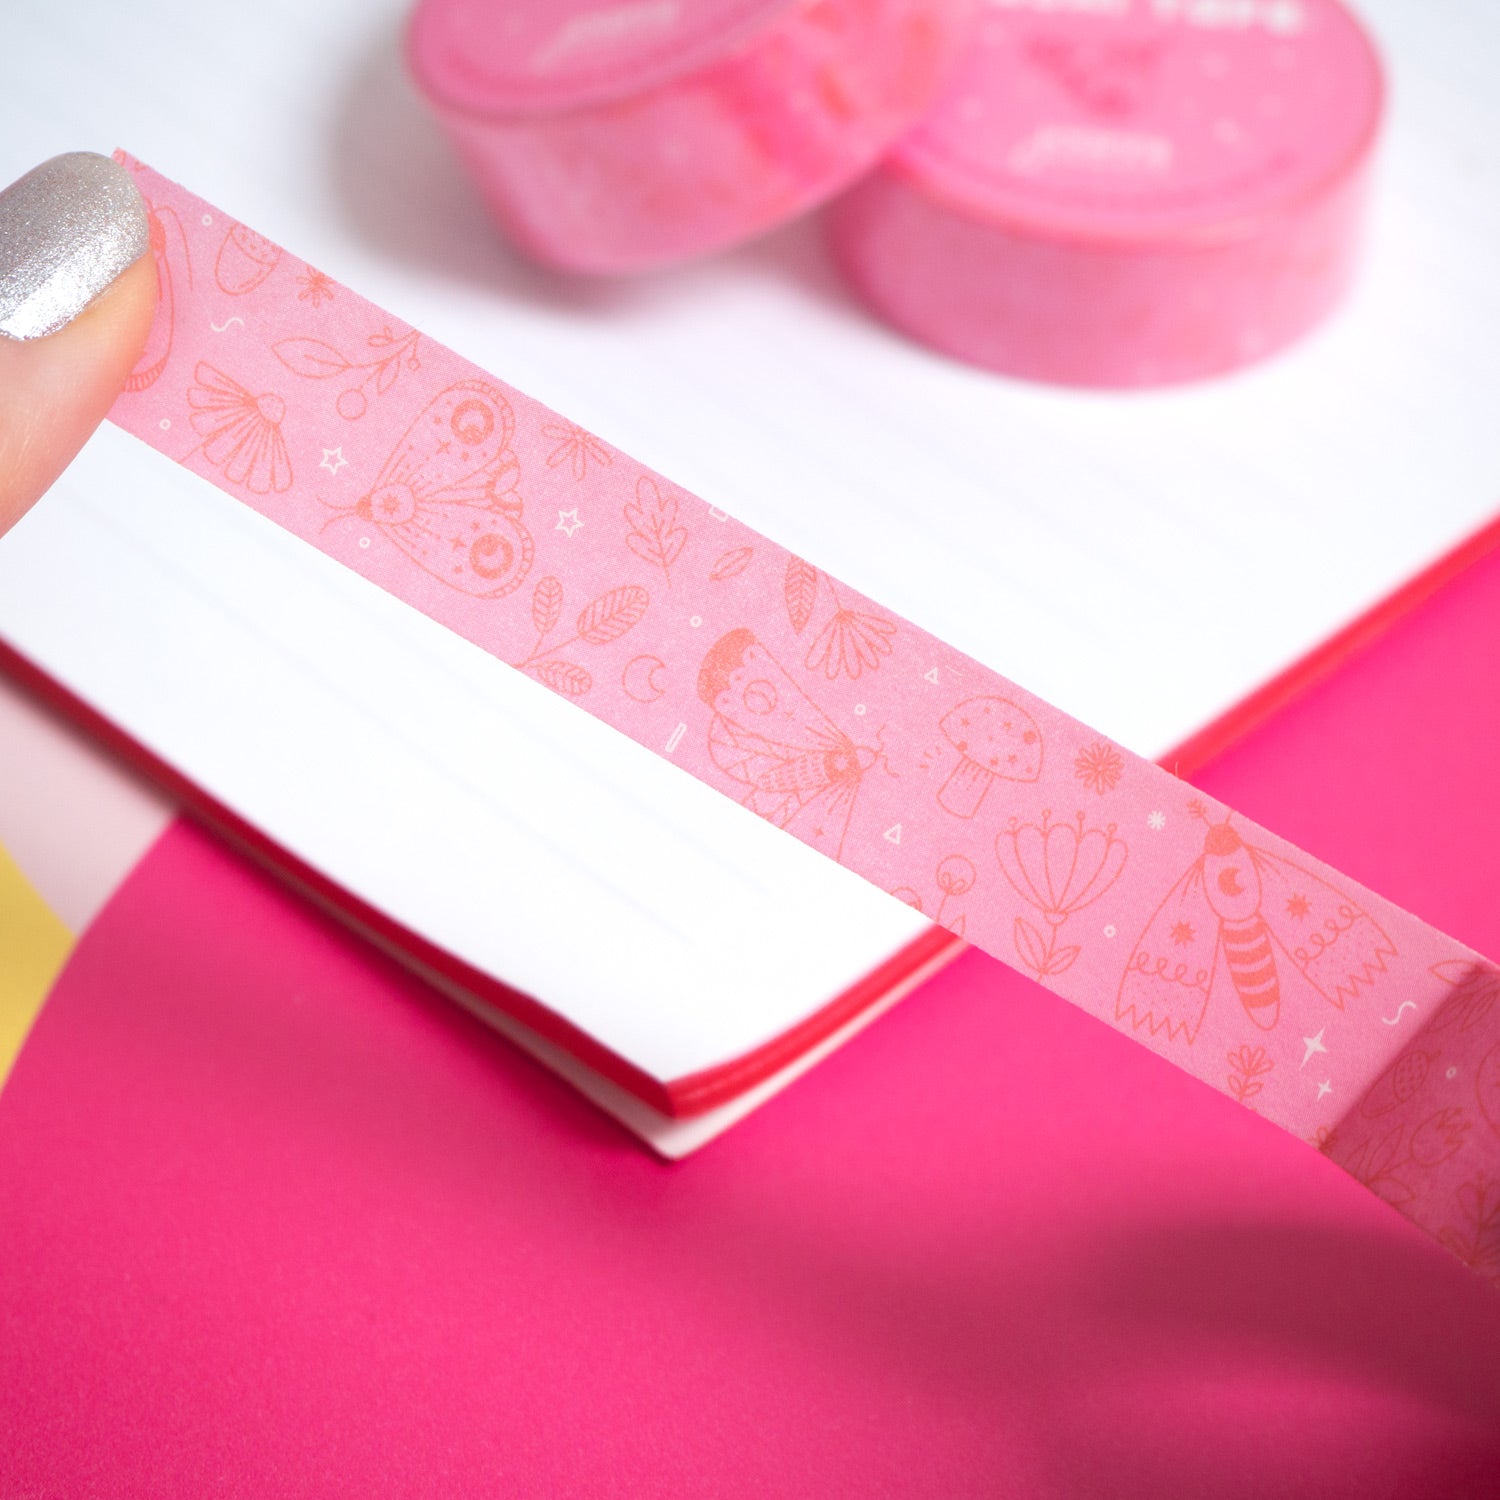 The pink moths washi tape being peeled from the roll by a pair of hands over a white notebook and pink background.